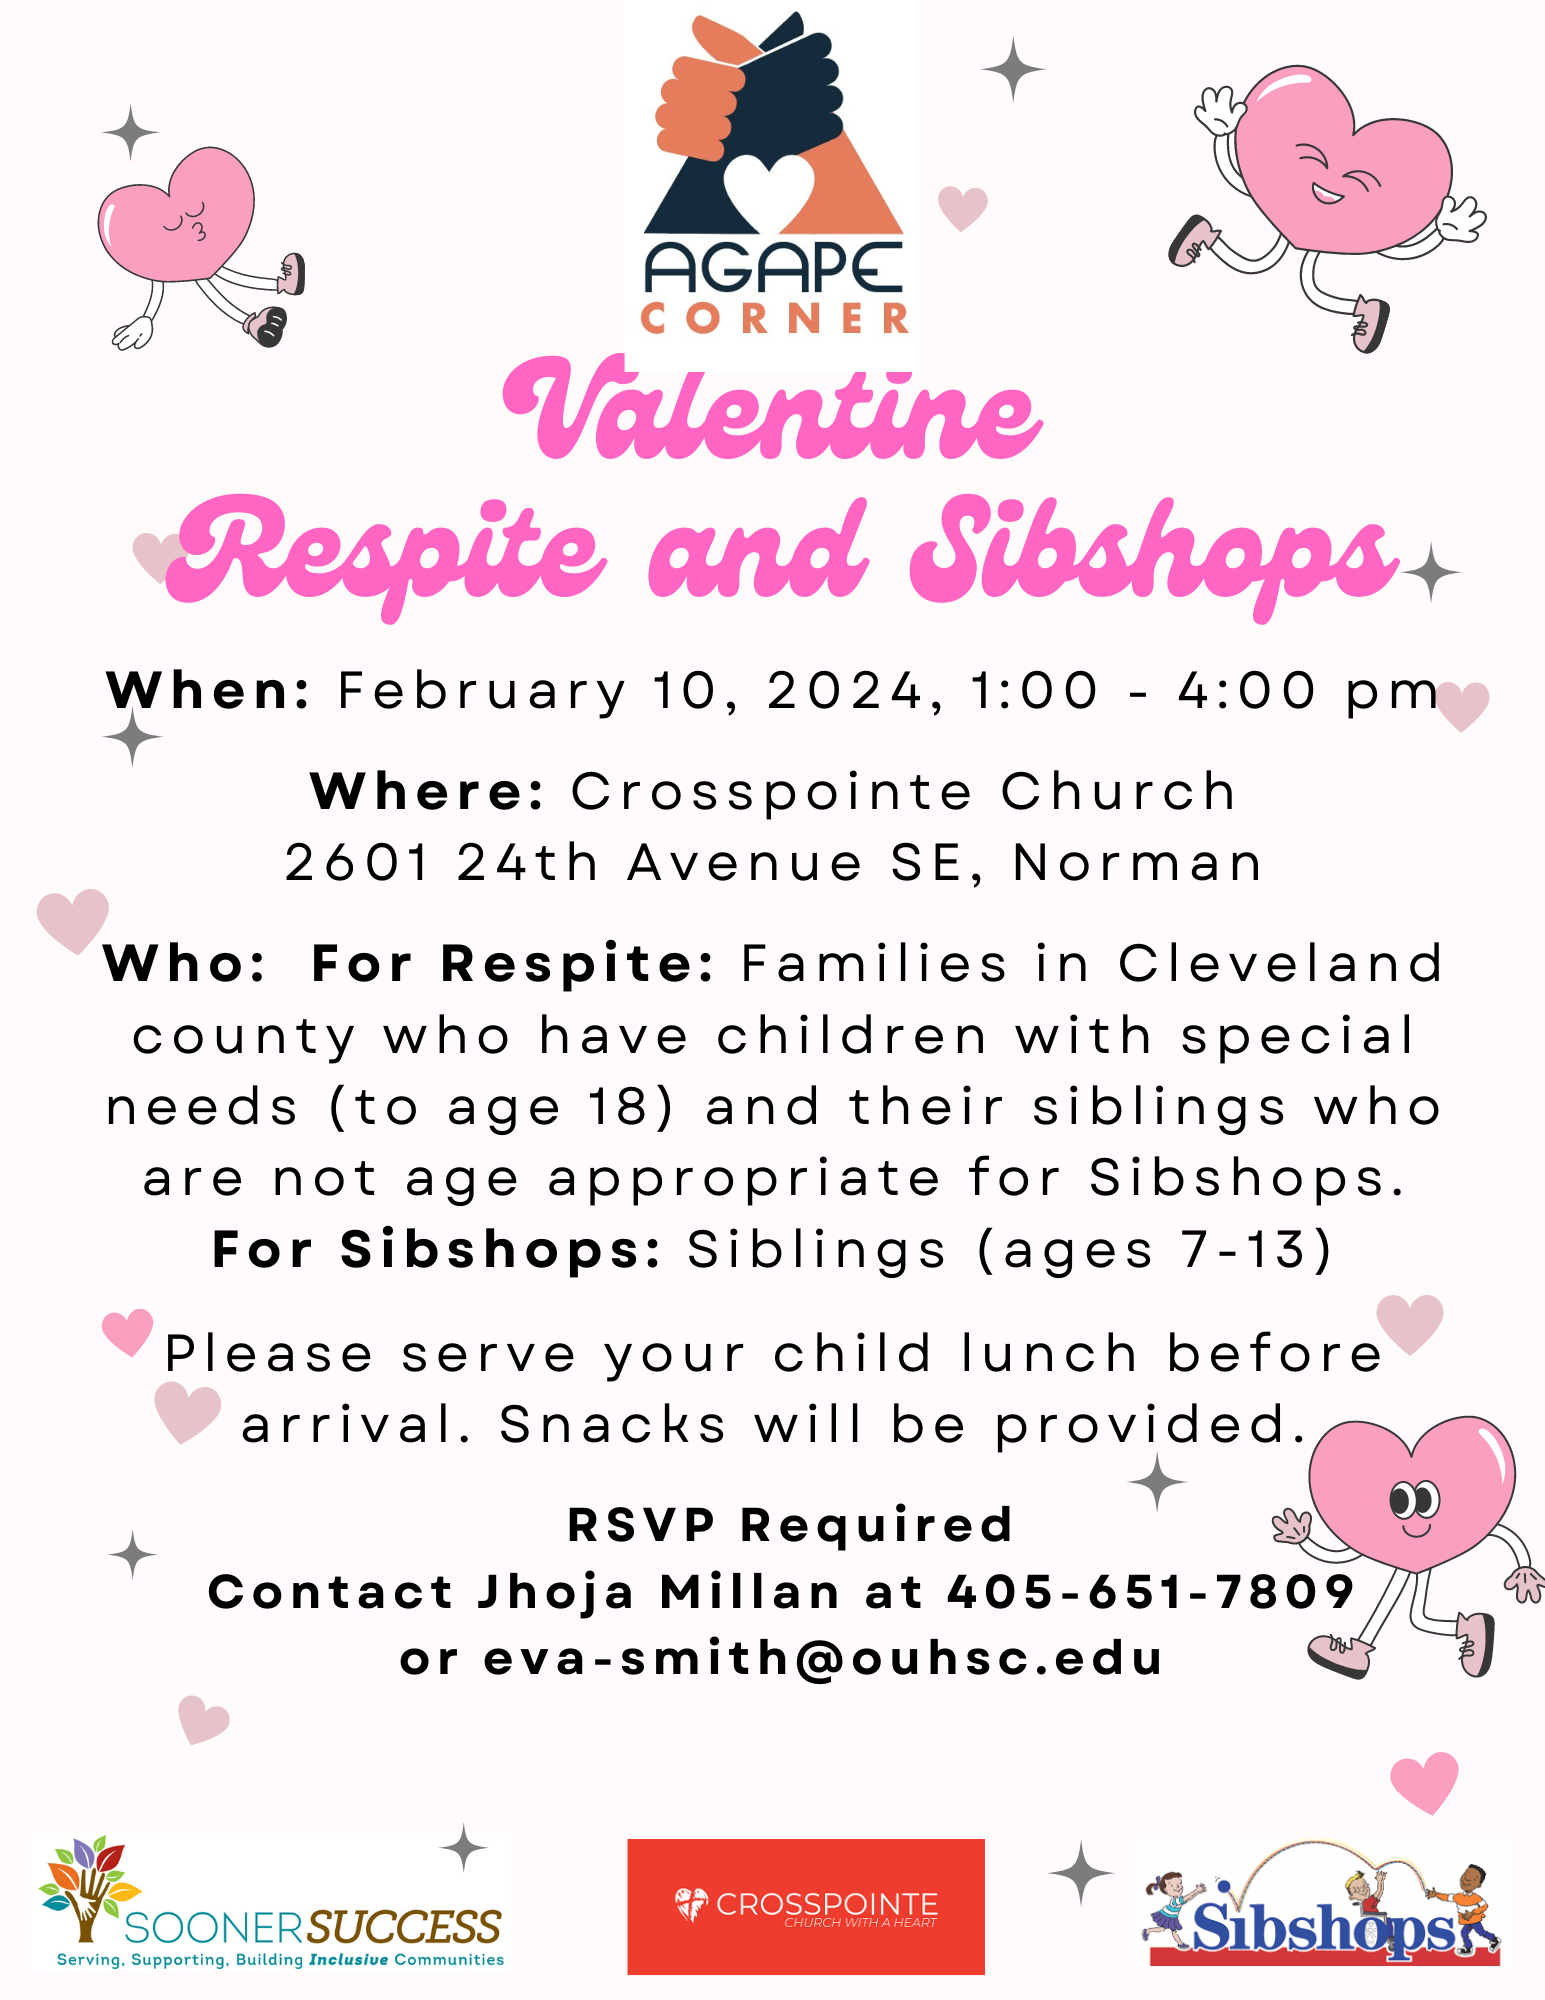 When: February 10, 2024, 1:00 - 4:00 pm  Where: Crosspointe Church 2601 24th Avenue SE, Norman  Who:  For Respite: Families in Cleveland county who have children with special needs (to age 18) and their siblings who are not age appropriate for Sibshops. For Sibshops: Siblings (ages 7-13)  Please serve your child lunch before arrival. Snacks will be provided. 405-651-7809